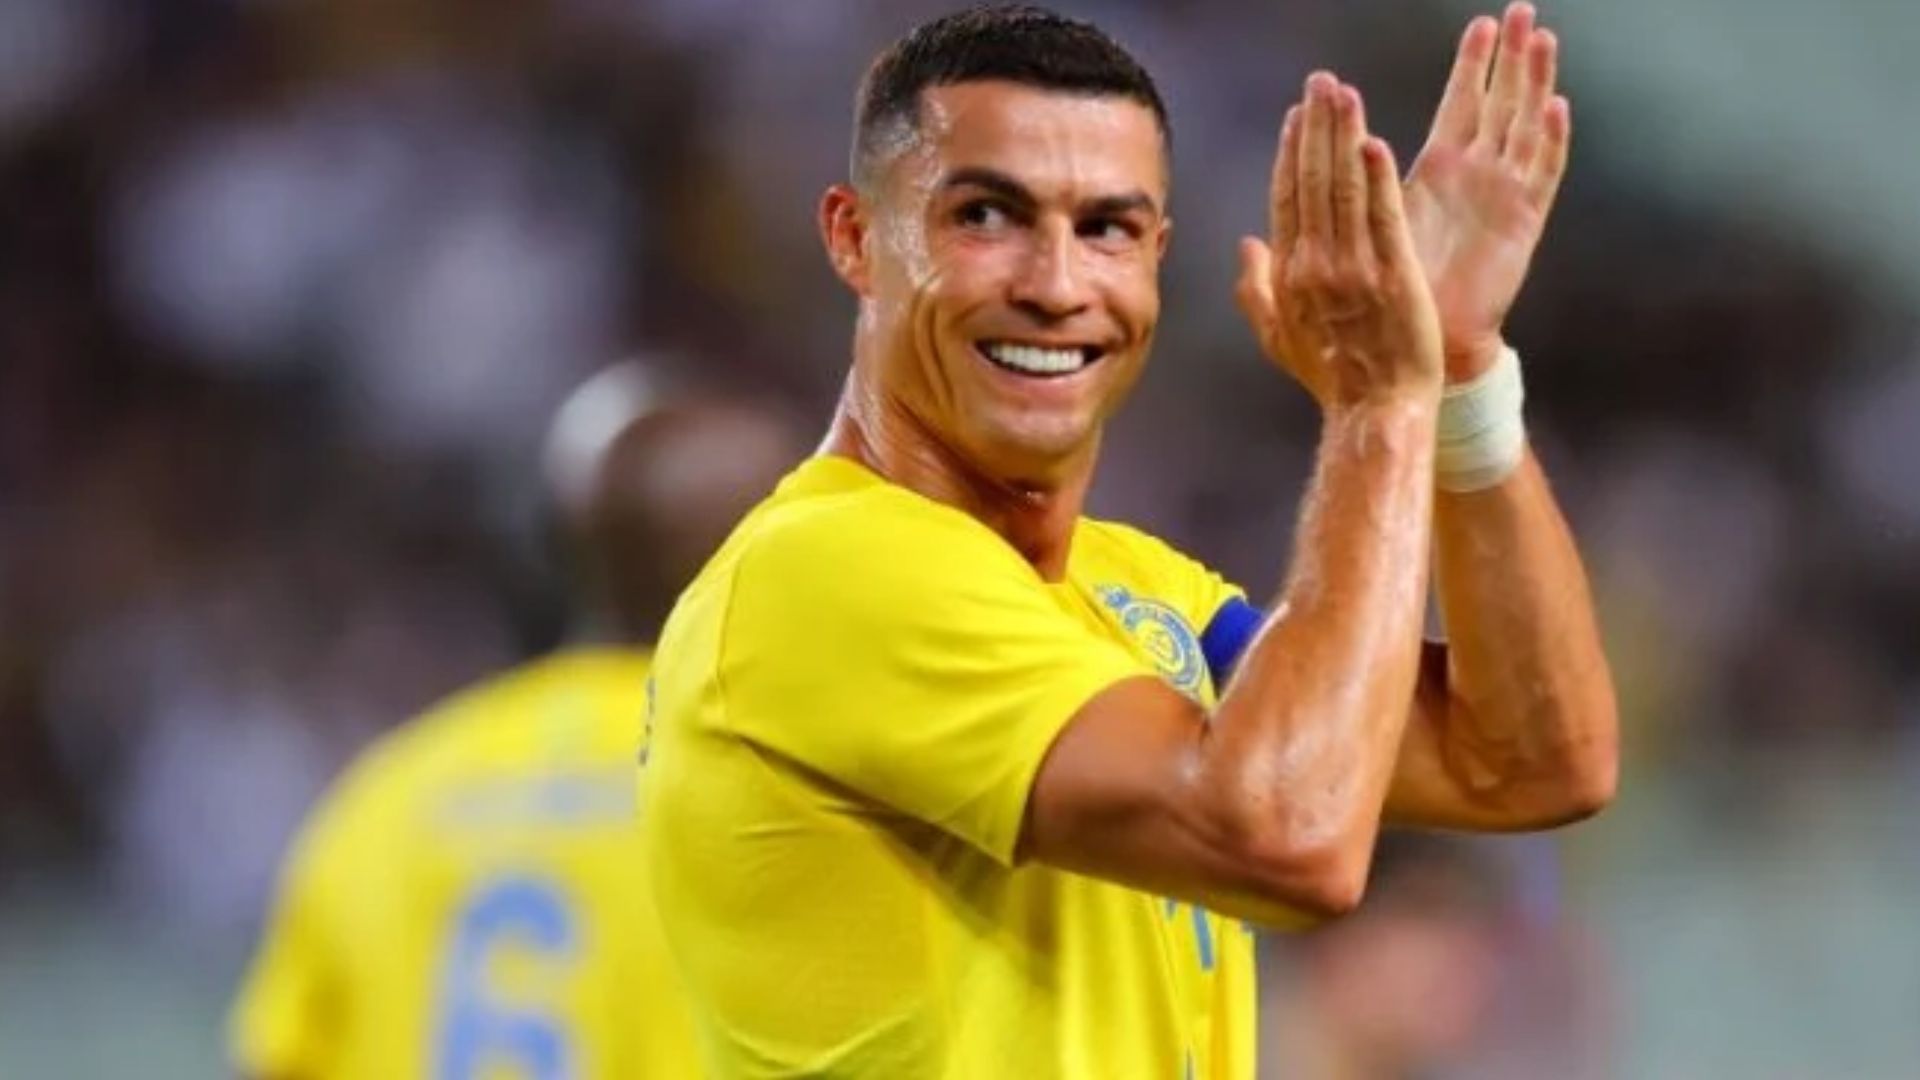 Ronaldo's Remarkable Gesture After Penalty Award Leaves Internet in Awe !